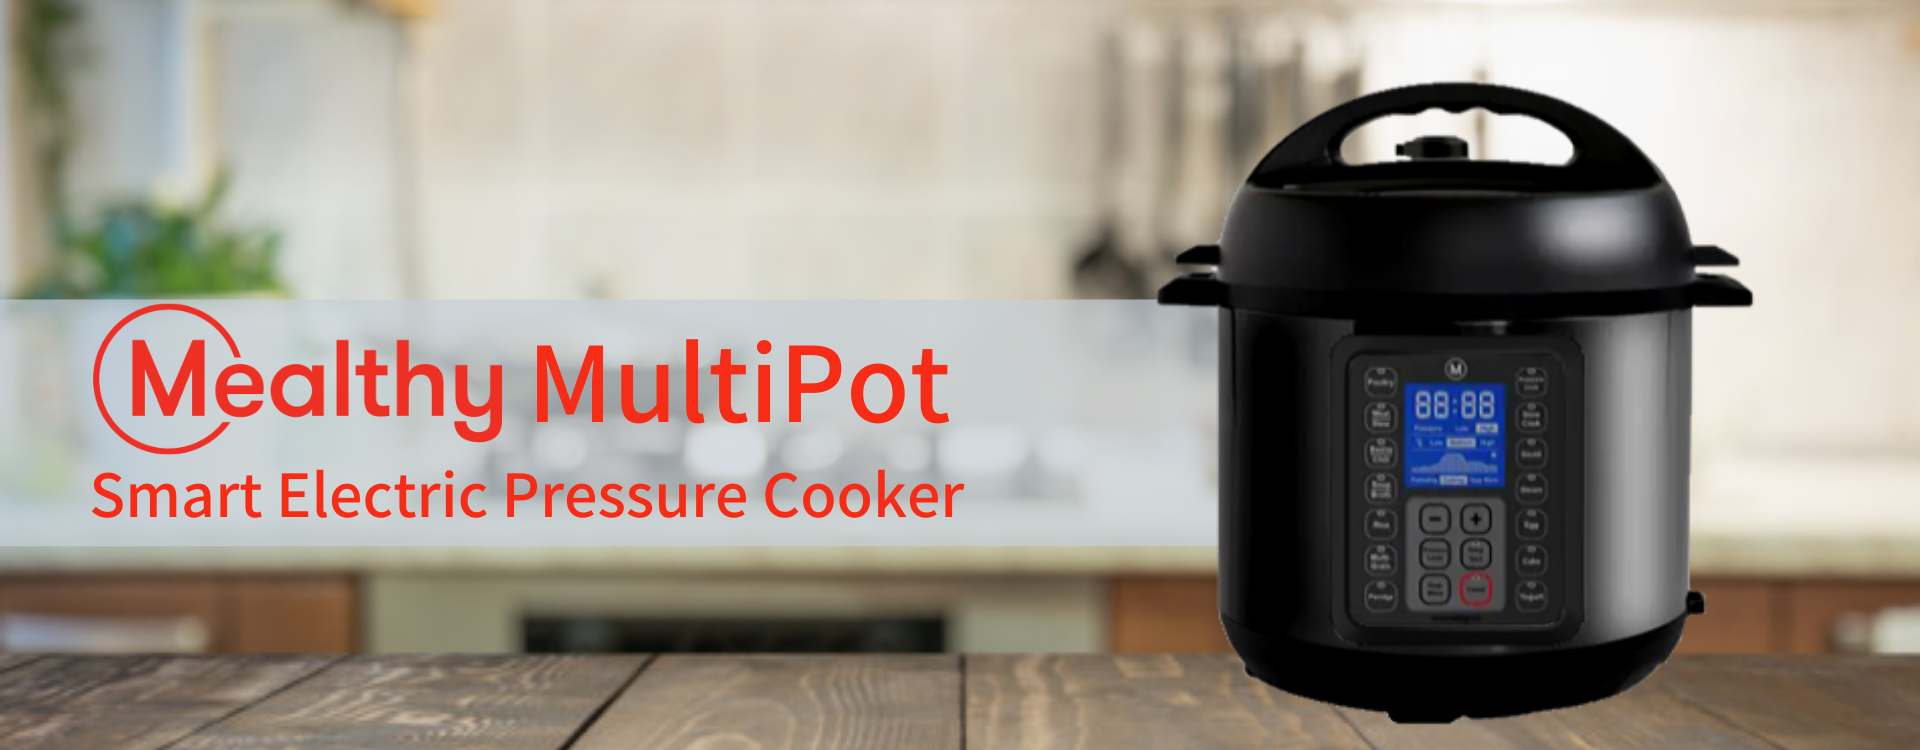 Mealthy India Electric Pressure Cooker